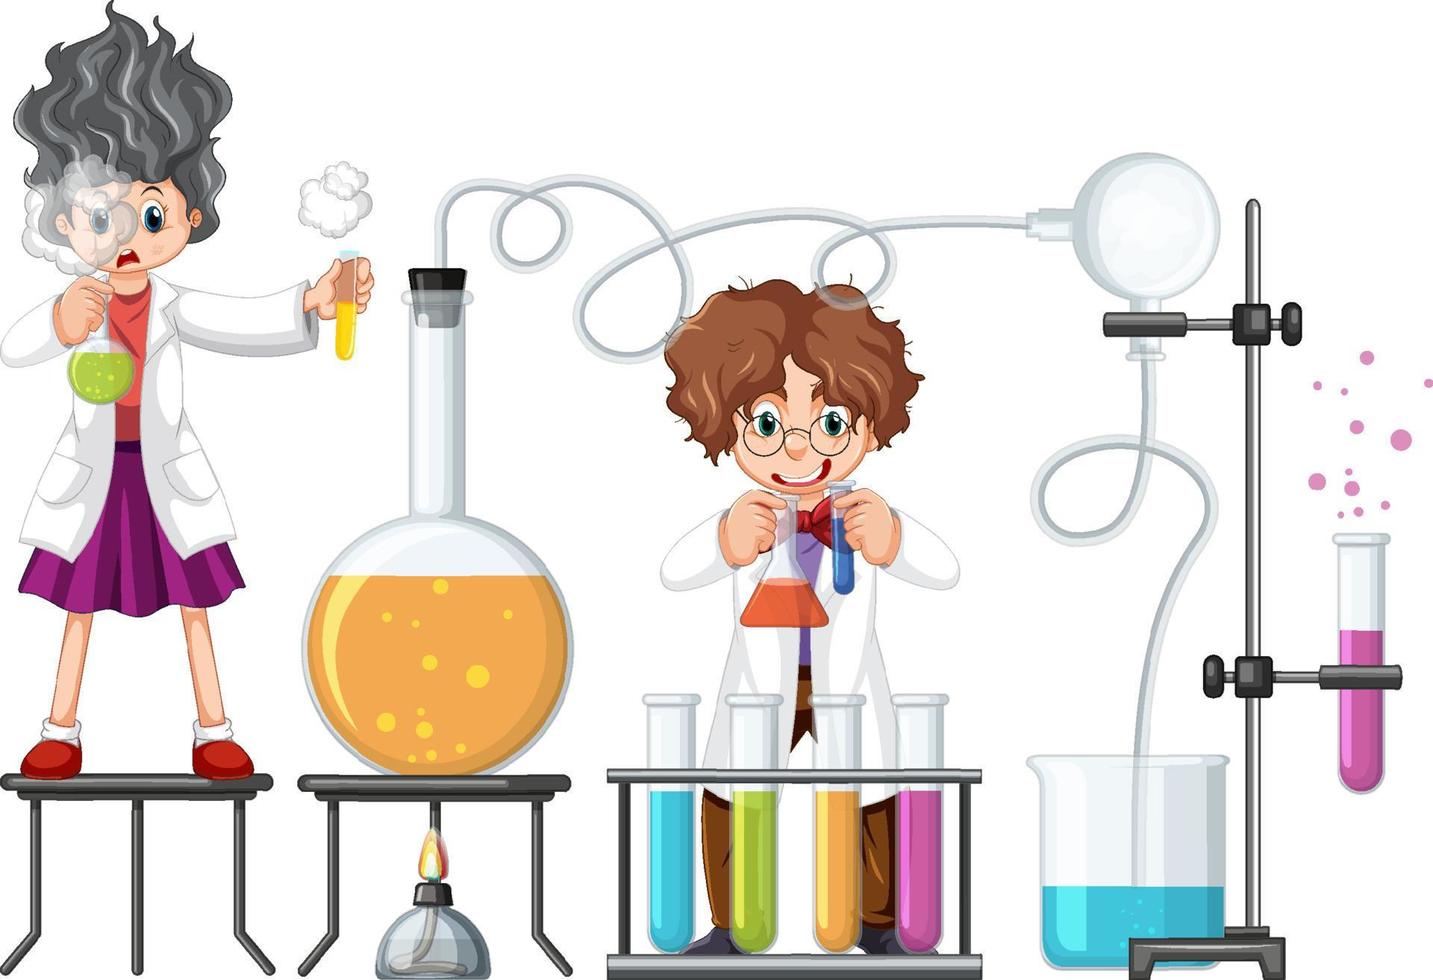 Scientist doing science experiment in the lab vector